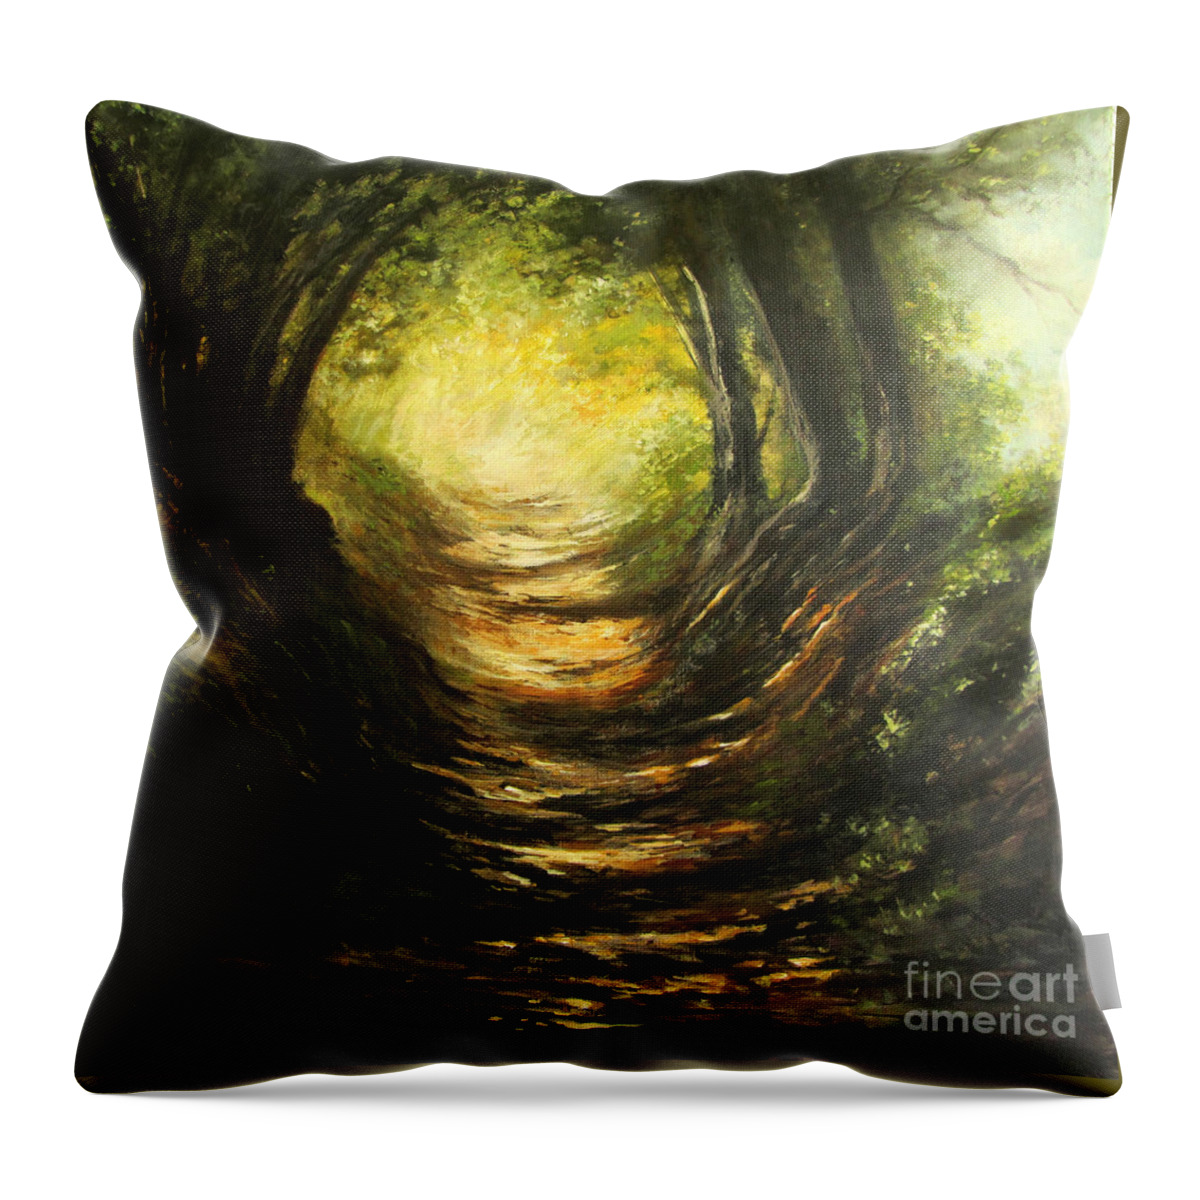 Landscape Throw Pillow featuring the painting May Your Light Always Shine by Valerie Travers